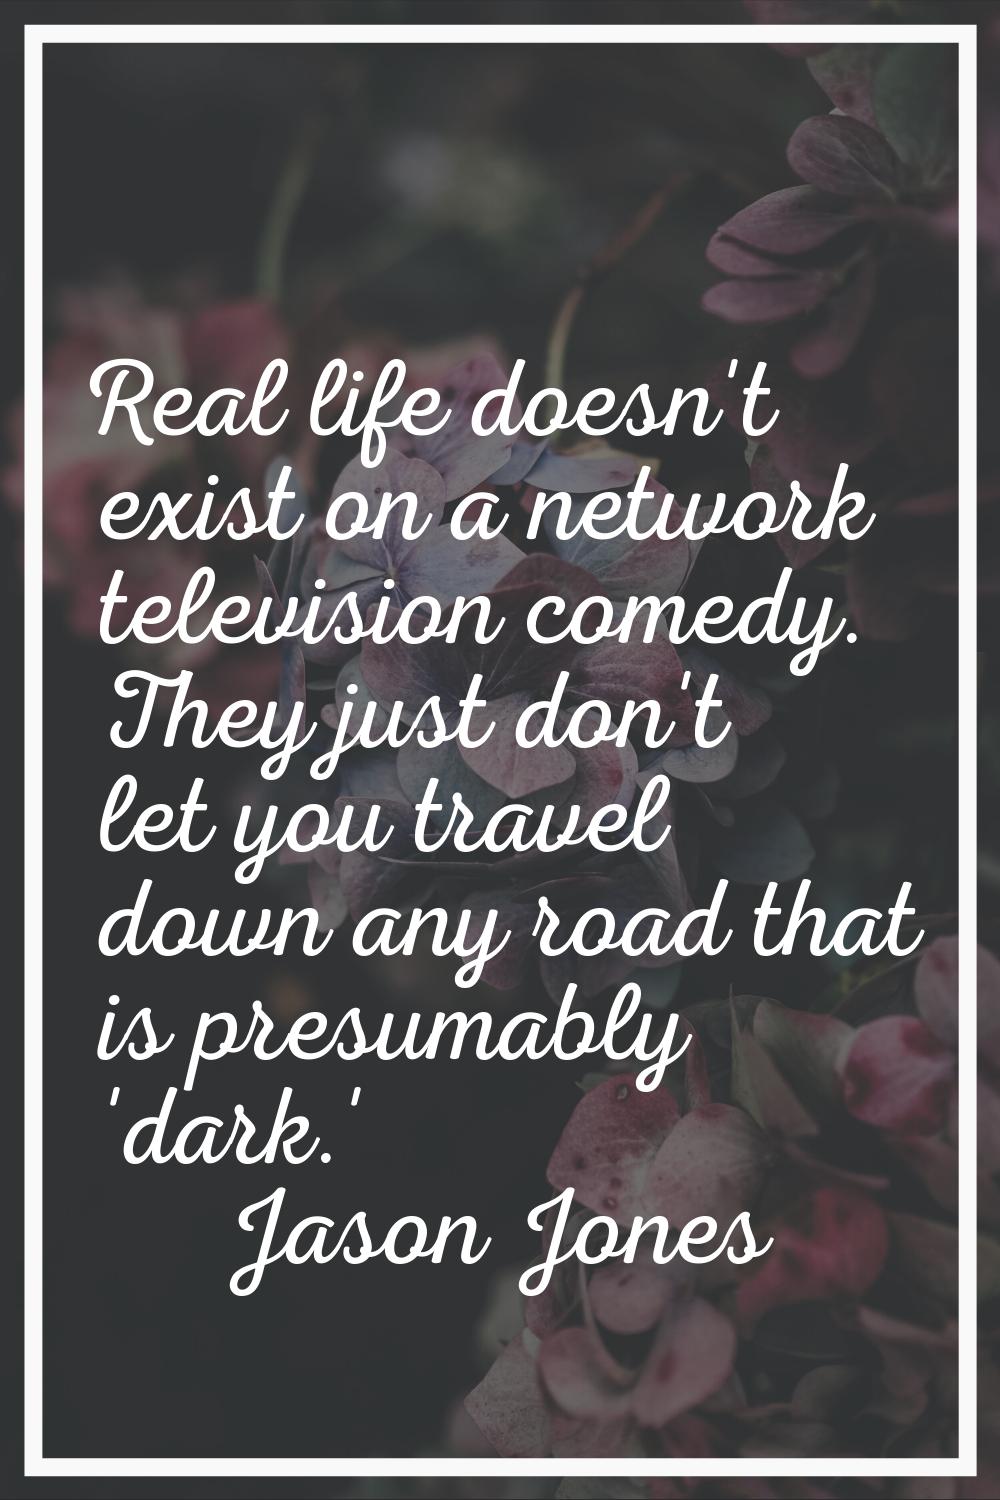 Real life doesn't exist on a network television comedy. They just don't let you travel down any roa